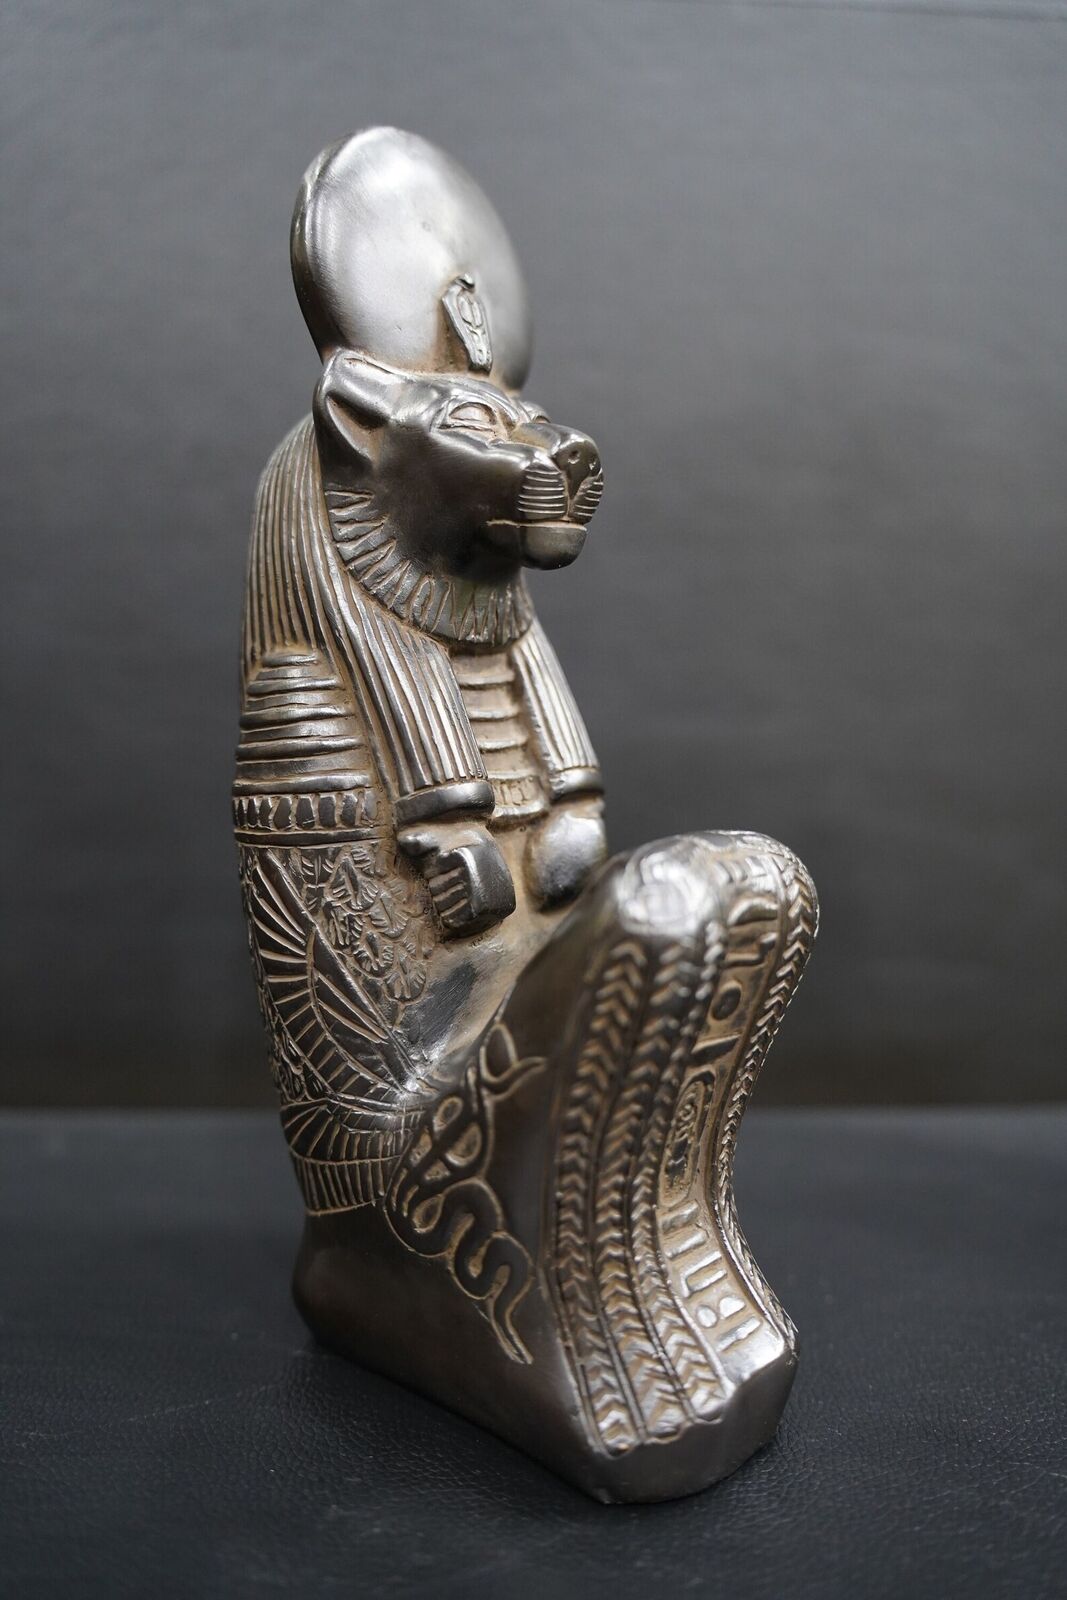 Sekhmet's Roar: Strength, Protection, and Divine Fury